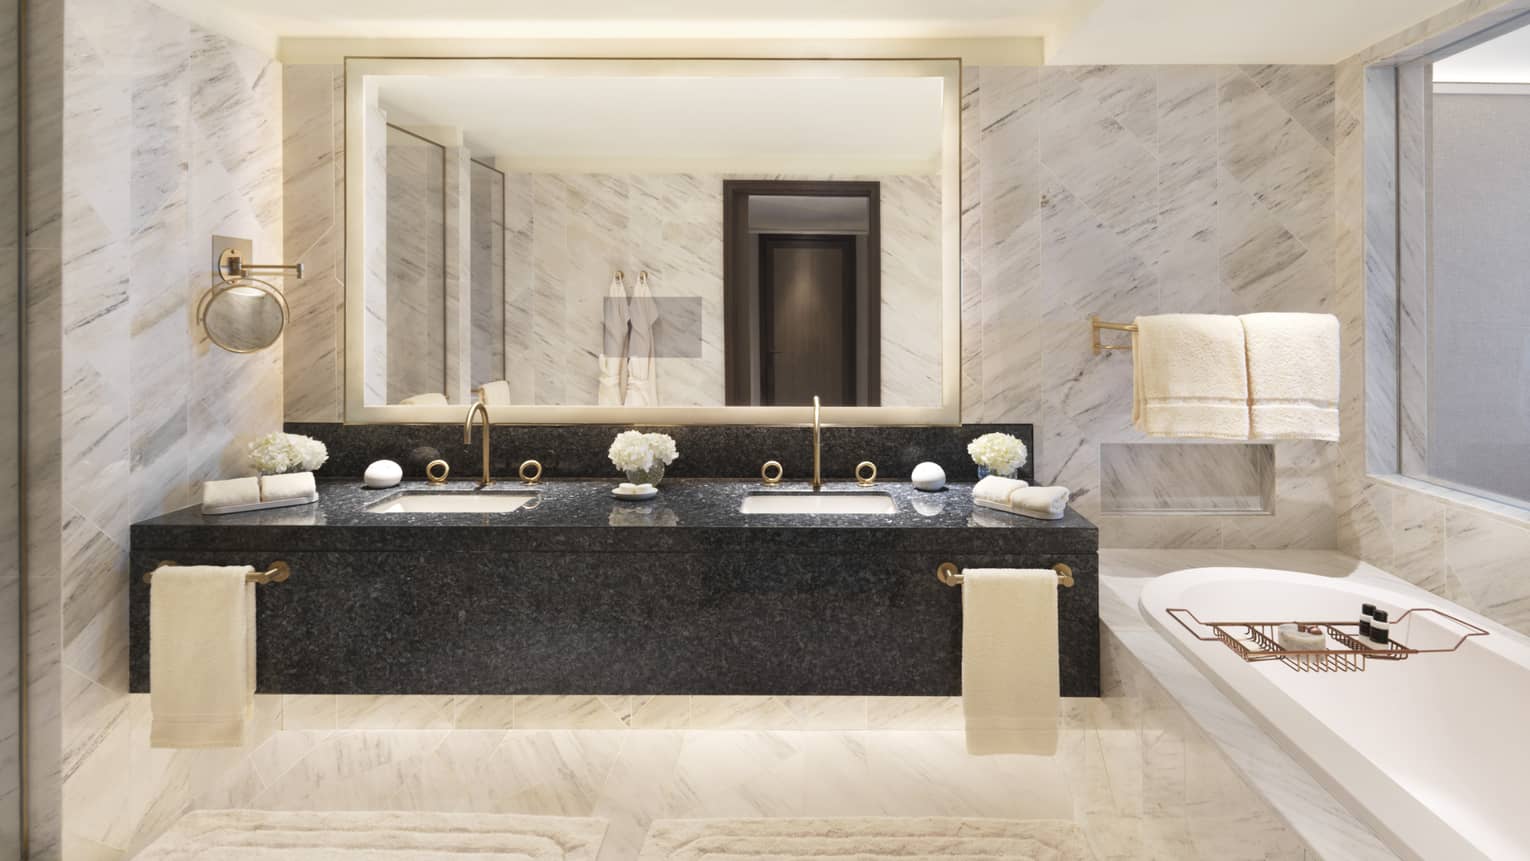 Marble bathroom with double vanity sinks and tub